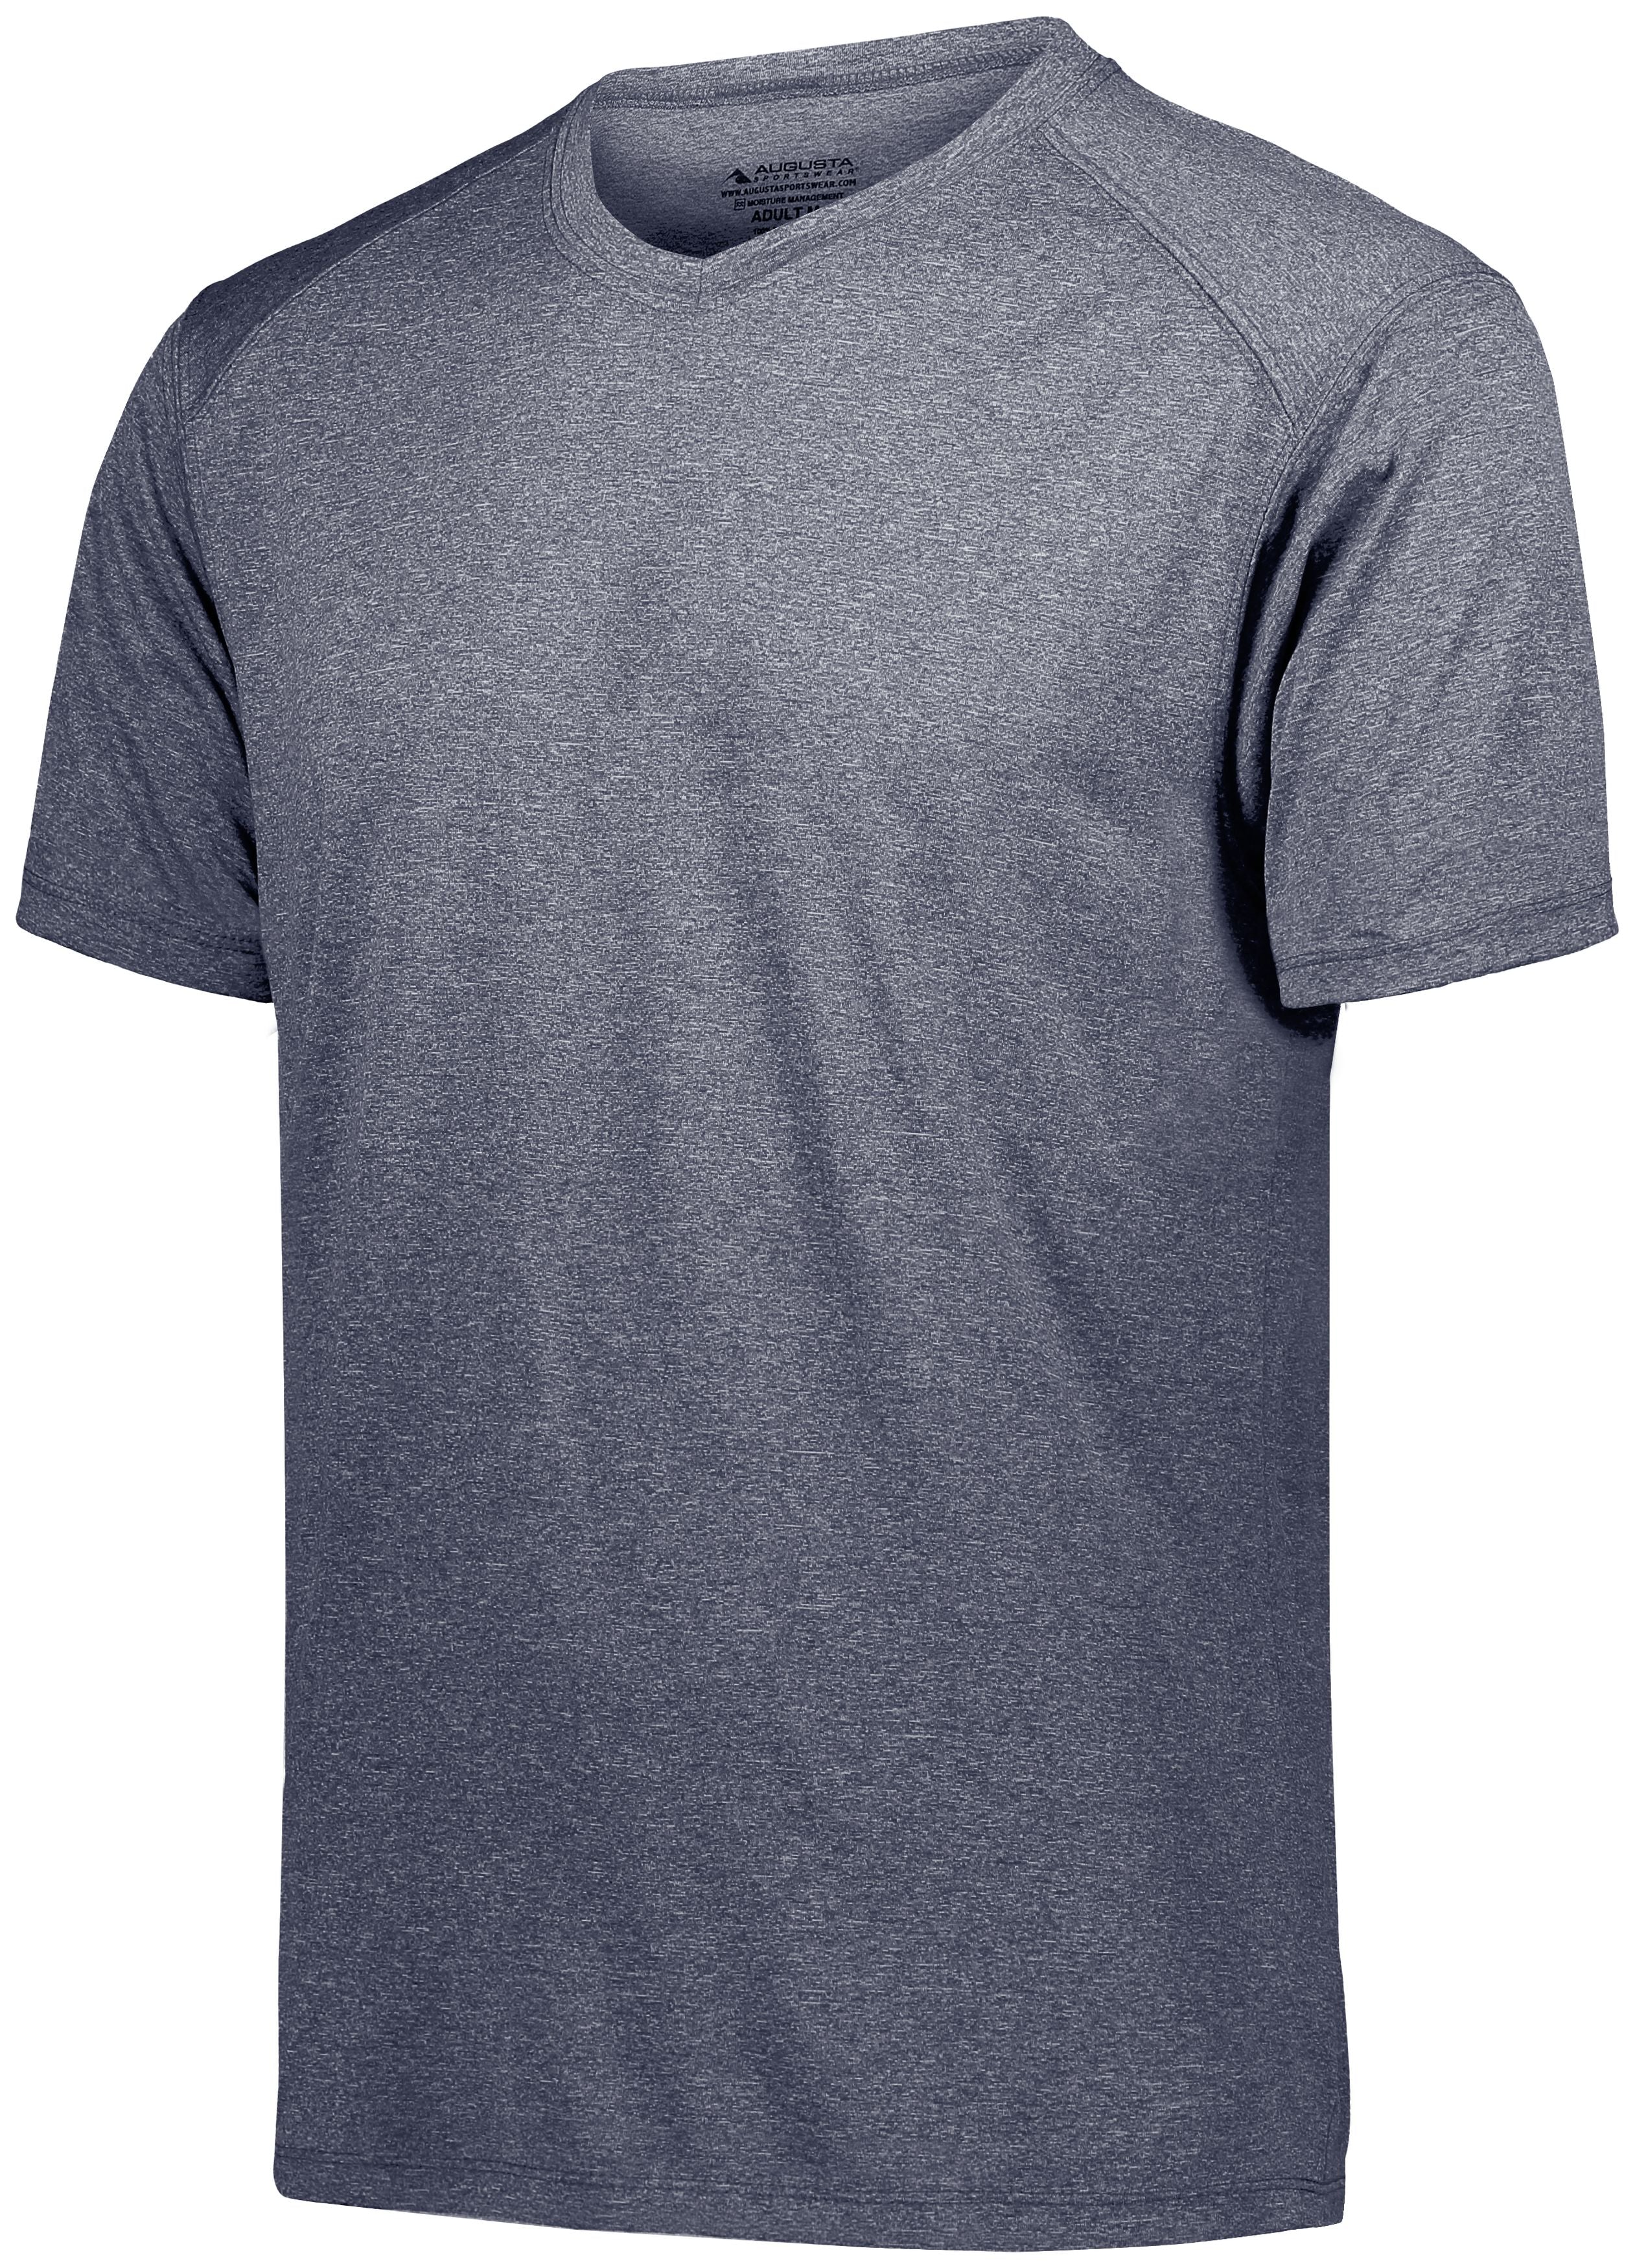 Augusta Sportswear Youth Kinergy Training Tee in Graphite Heather  -Part of the Youth, Youth-Tee-Shirt, T-Shirts, Augusta-Products, Shirts product lines at KanaleyCreations.com